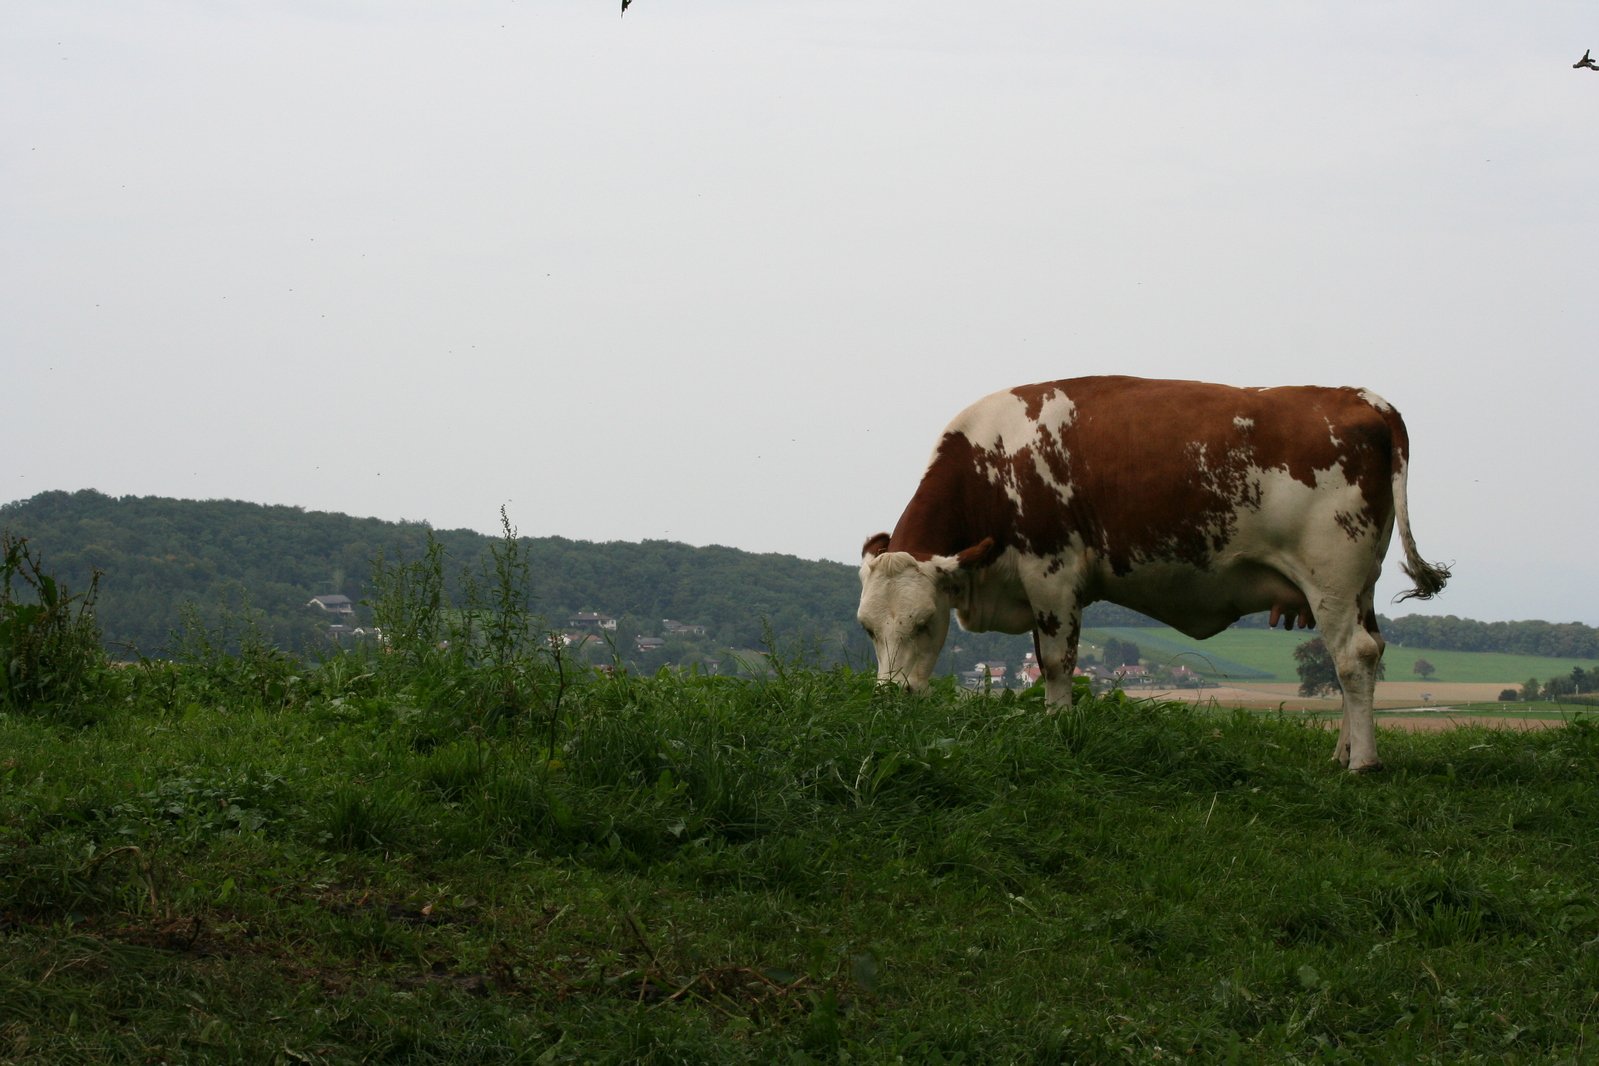 a brown and white cow in grassy field next to trees